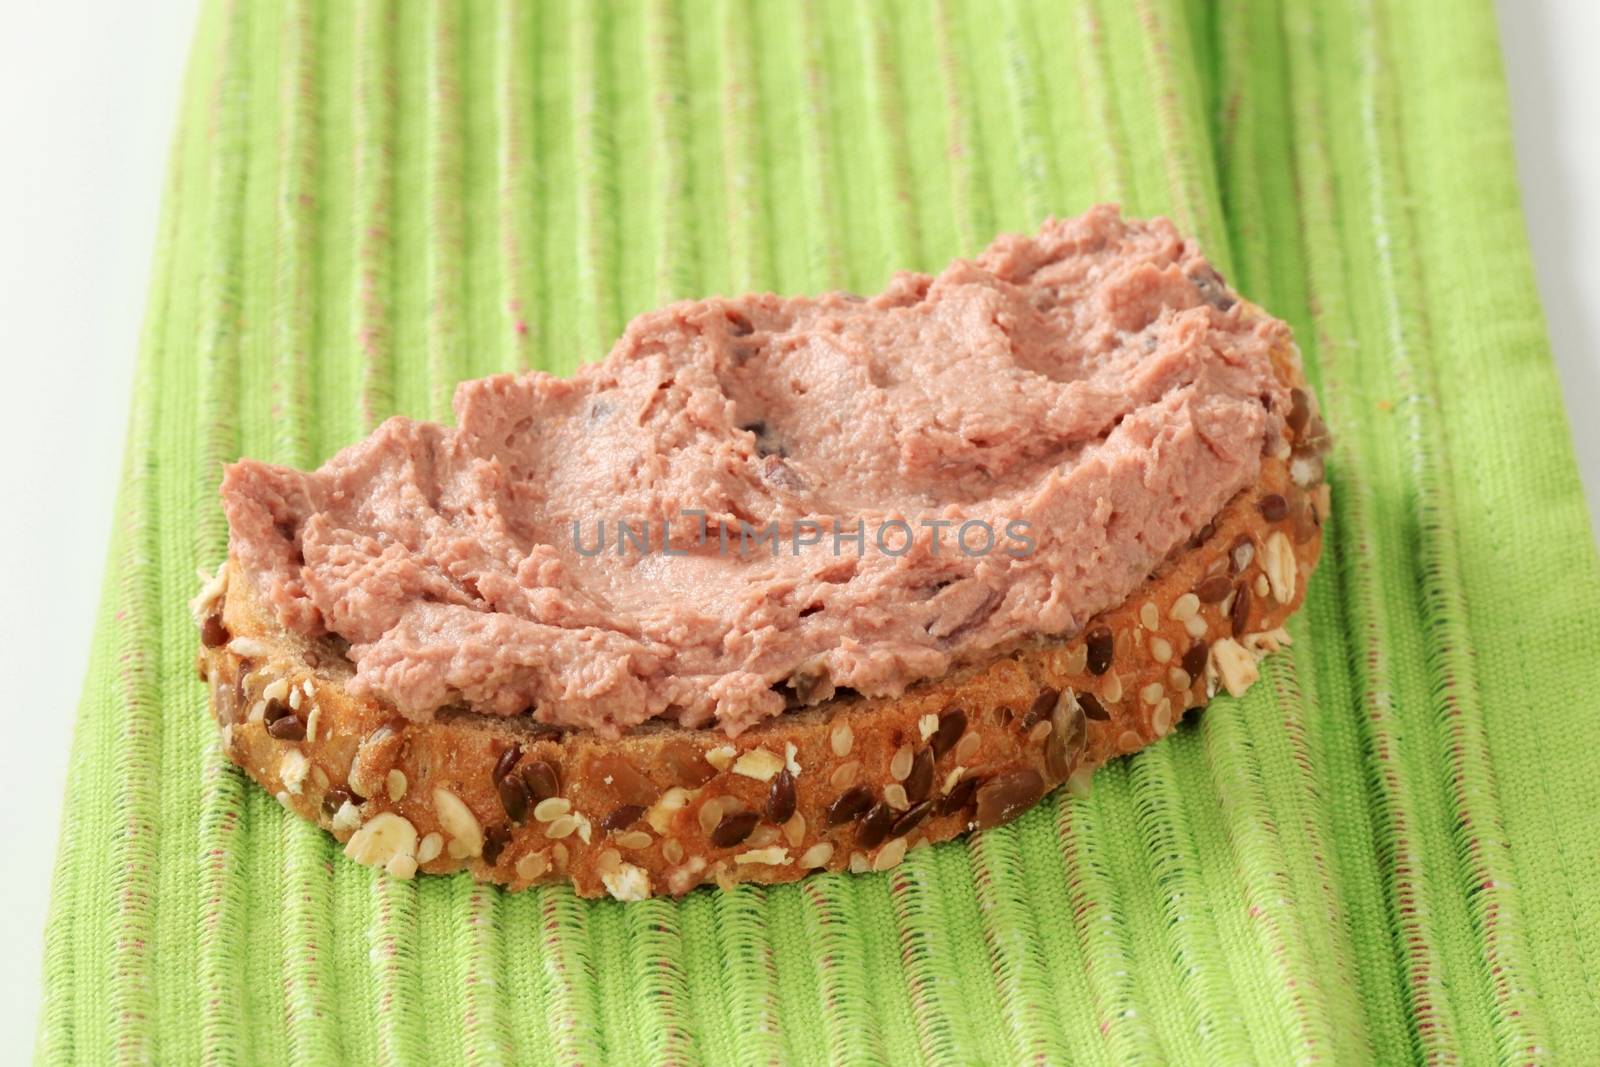 Whole grain bread with pate by Digifoodstock